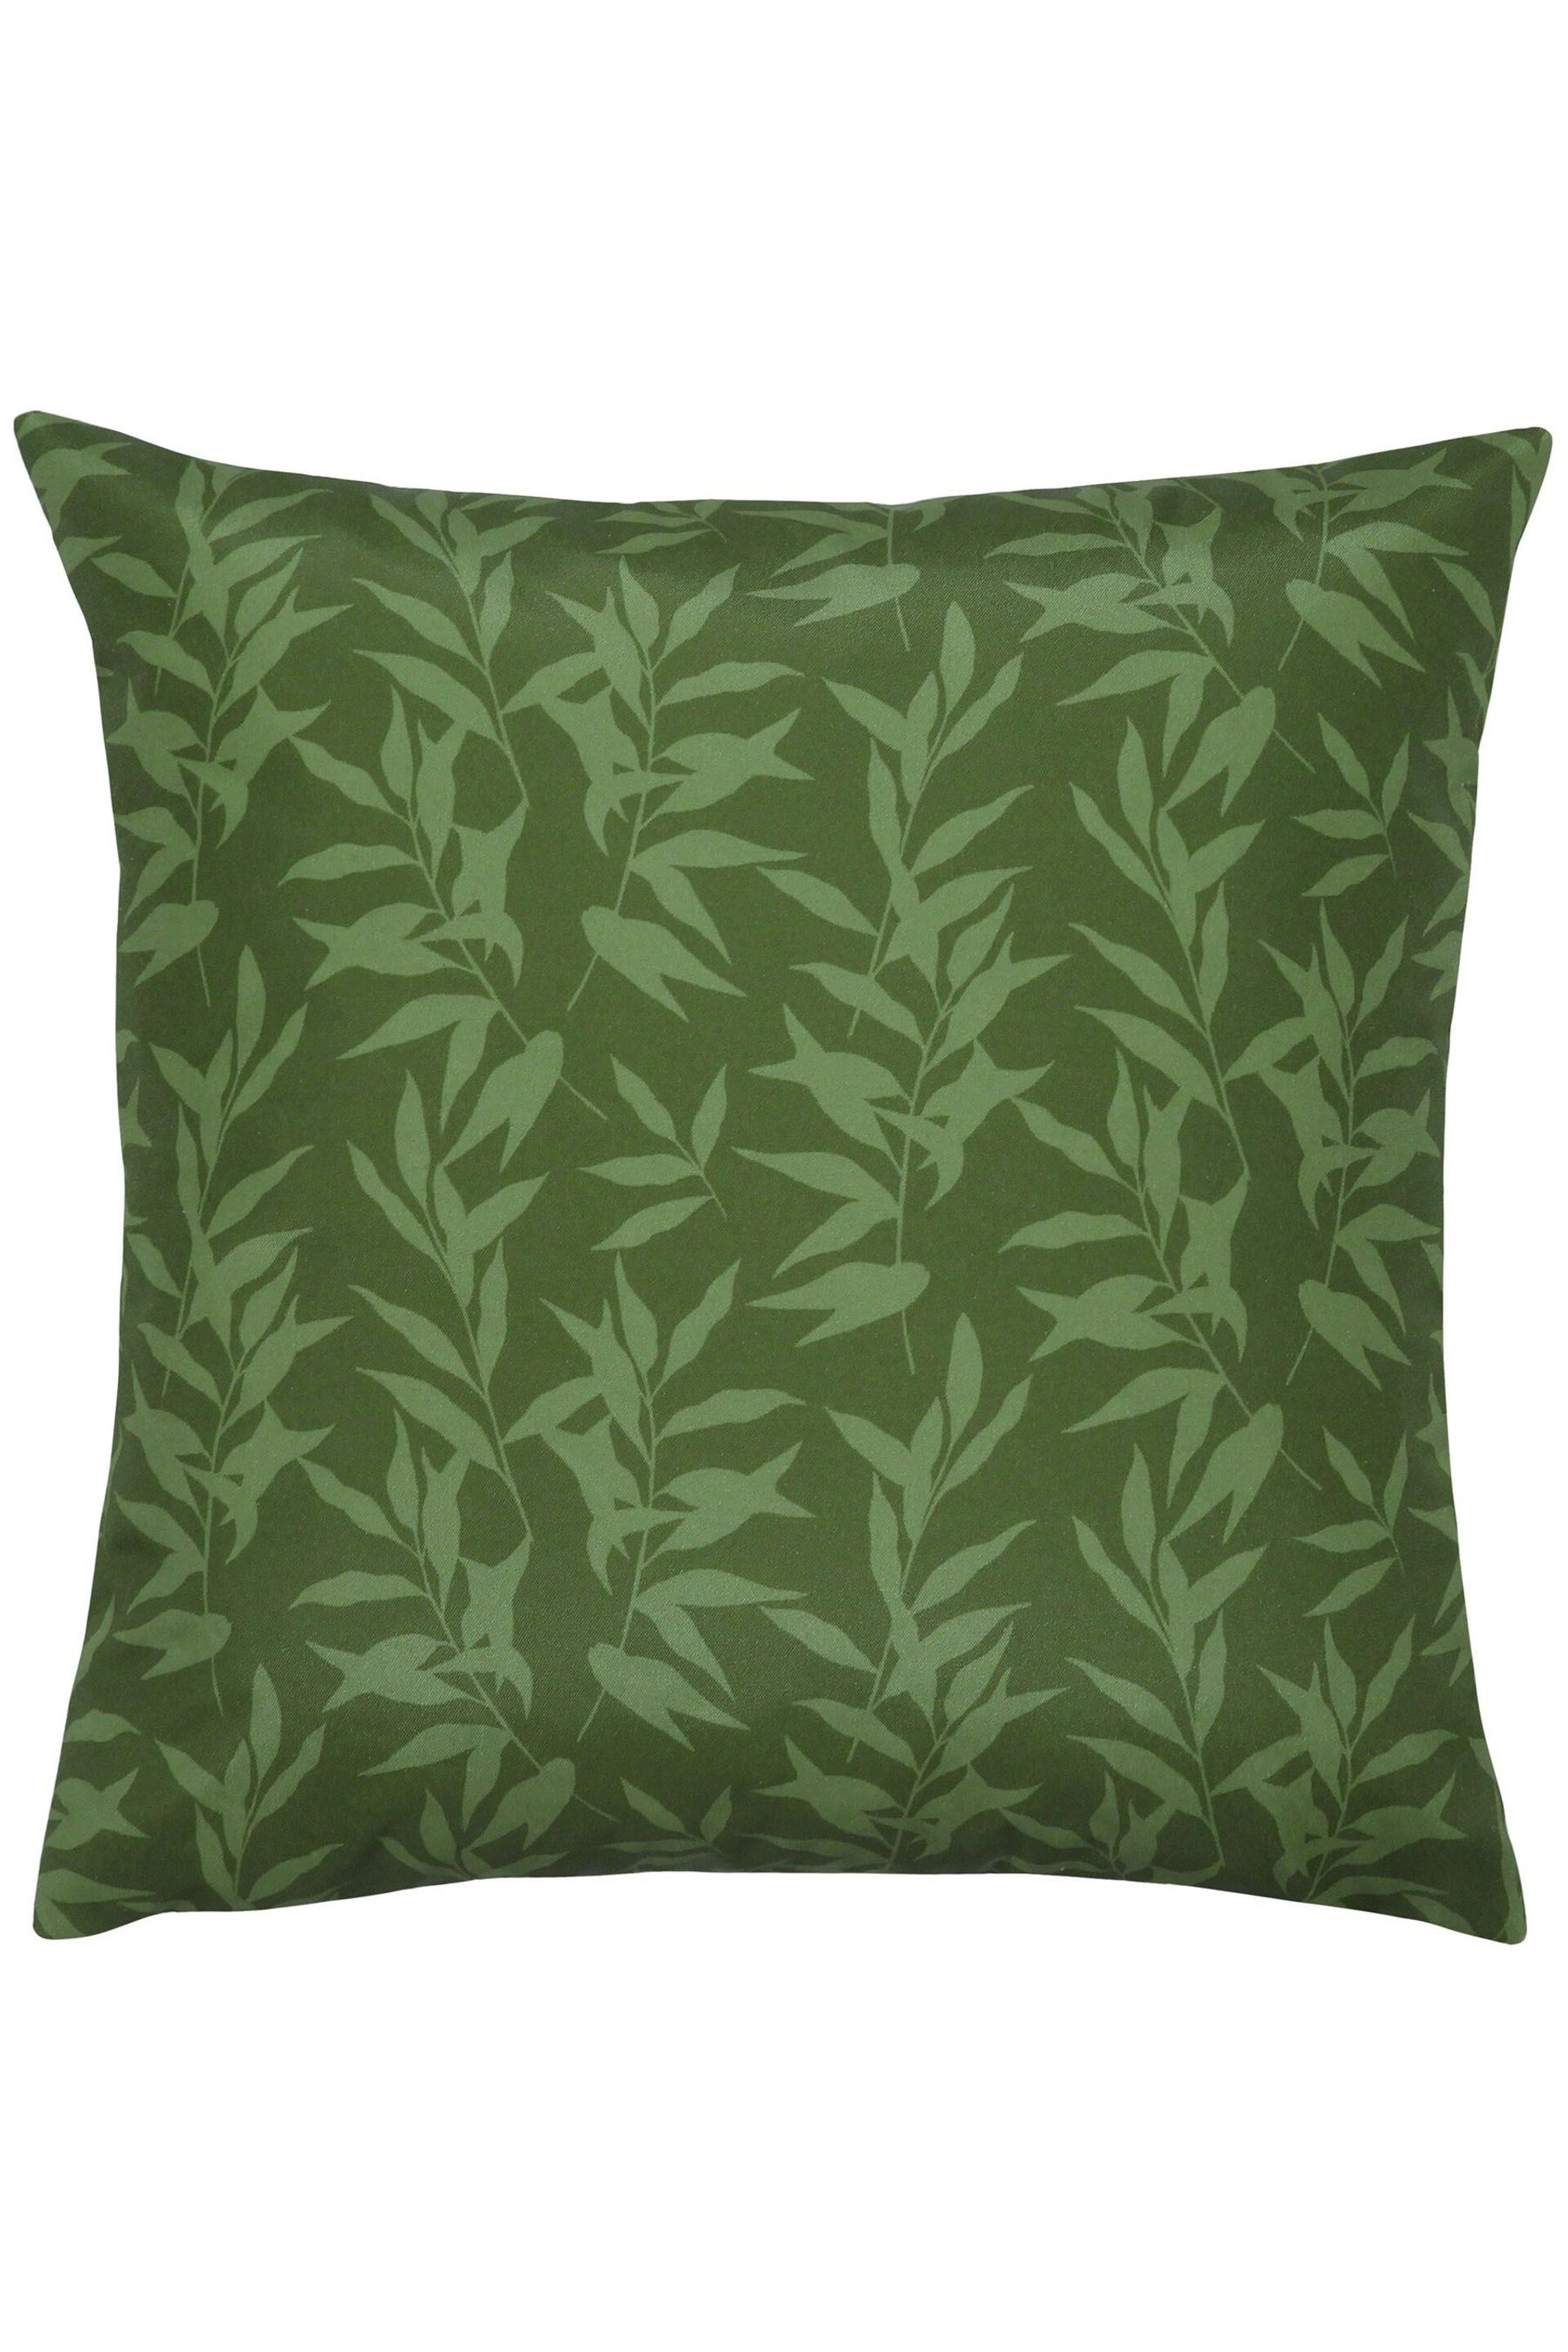 Evans Lichfield Blush Pink/Forest Green Cranes Outdoor Polyester Filled Cushion - Image 3 of 5